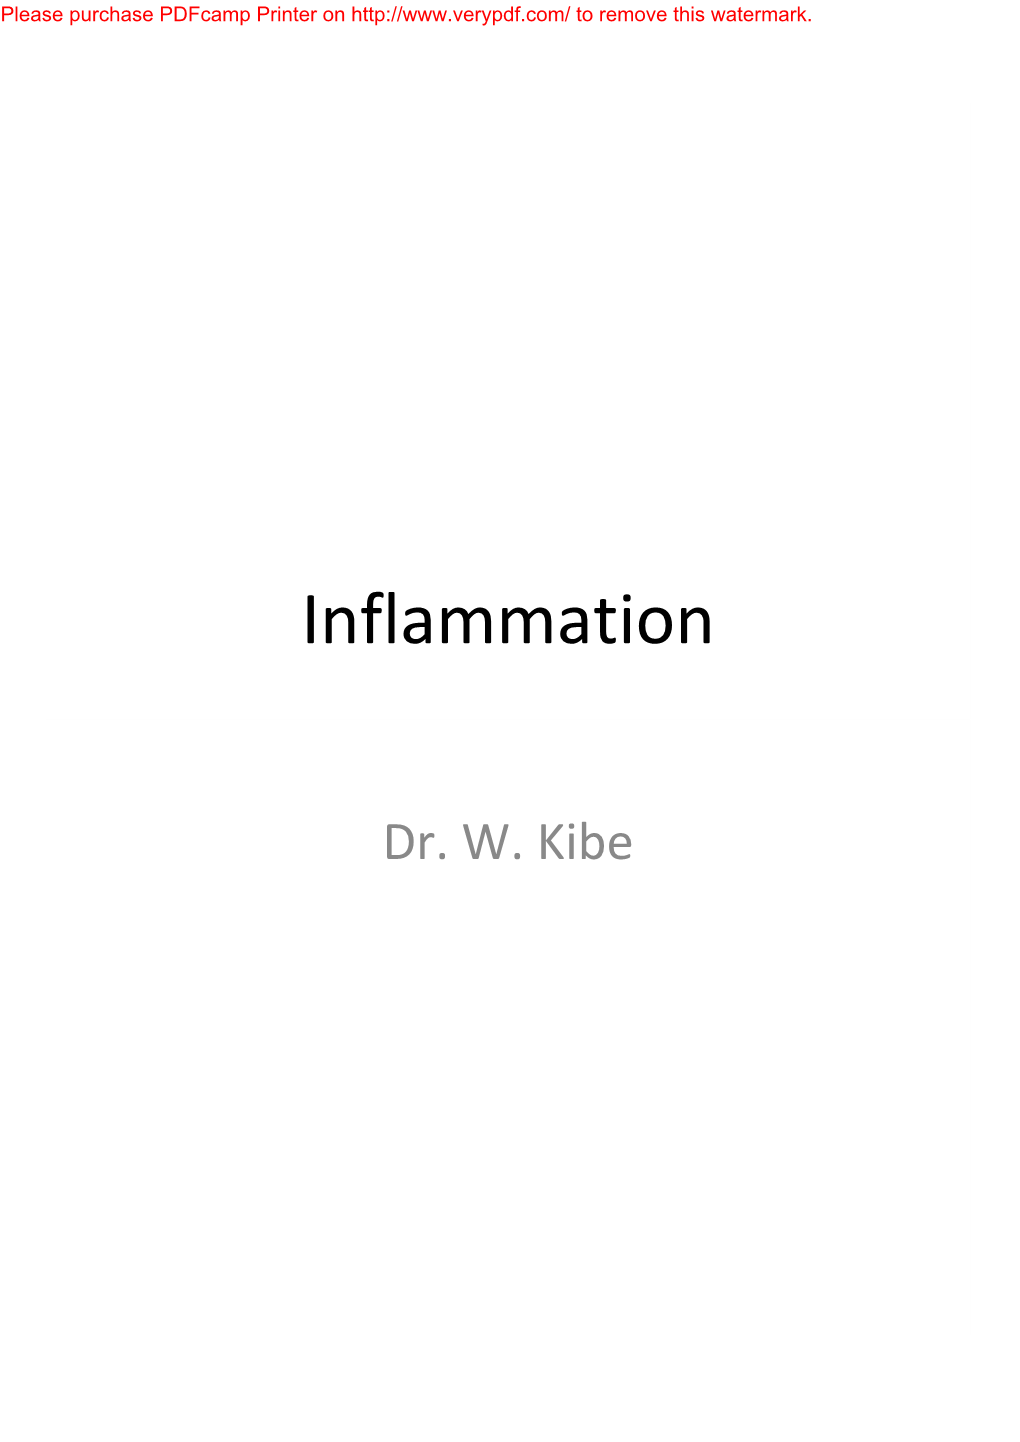 Chronic Inflammation Can Also Lead to a Host of Diseases, Such As Hay Fever, Atherosclerosis, and Rheumatoid Arthritis